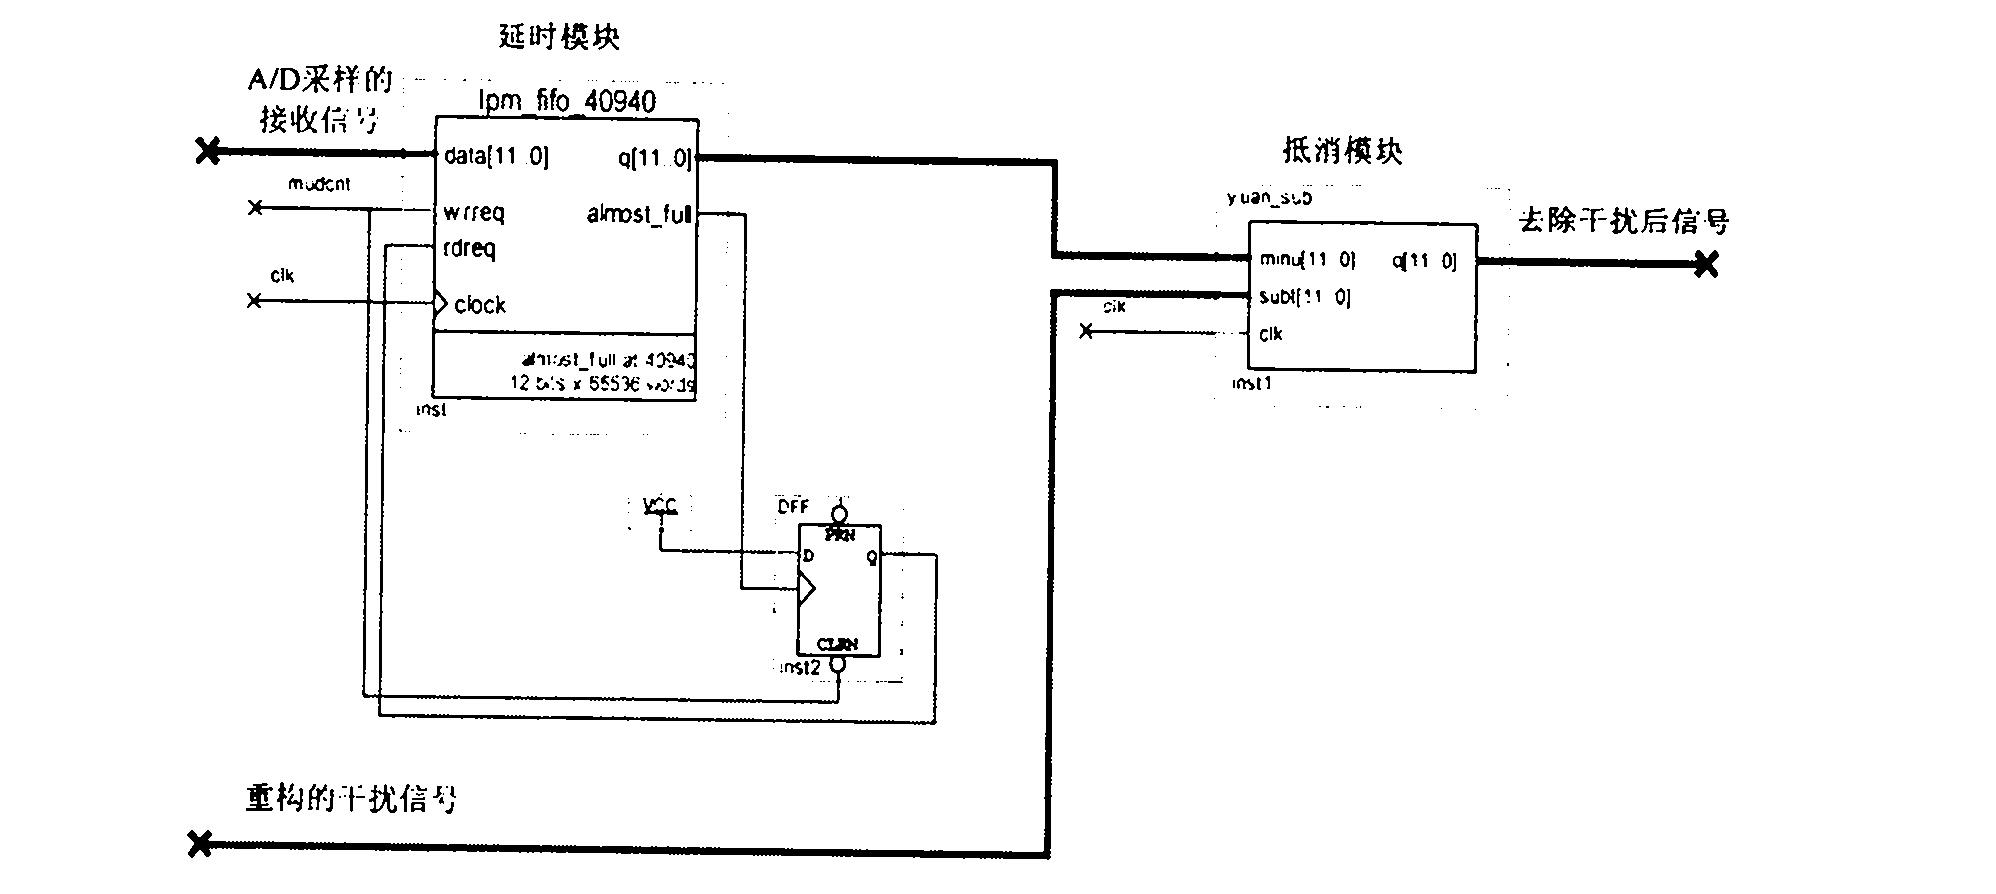 Algorithm and realization of self-adaptive parallel interference cancellation multi-user detector